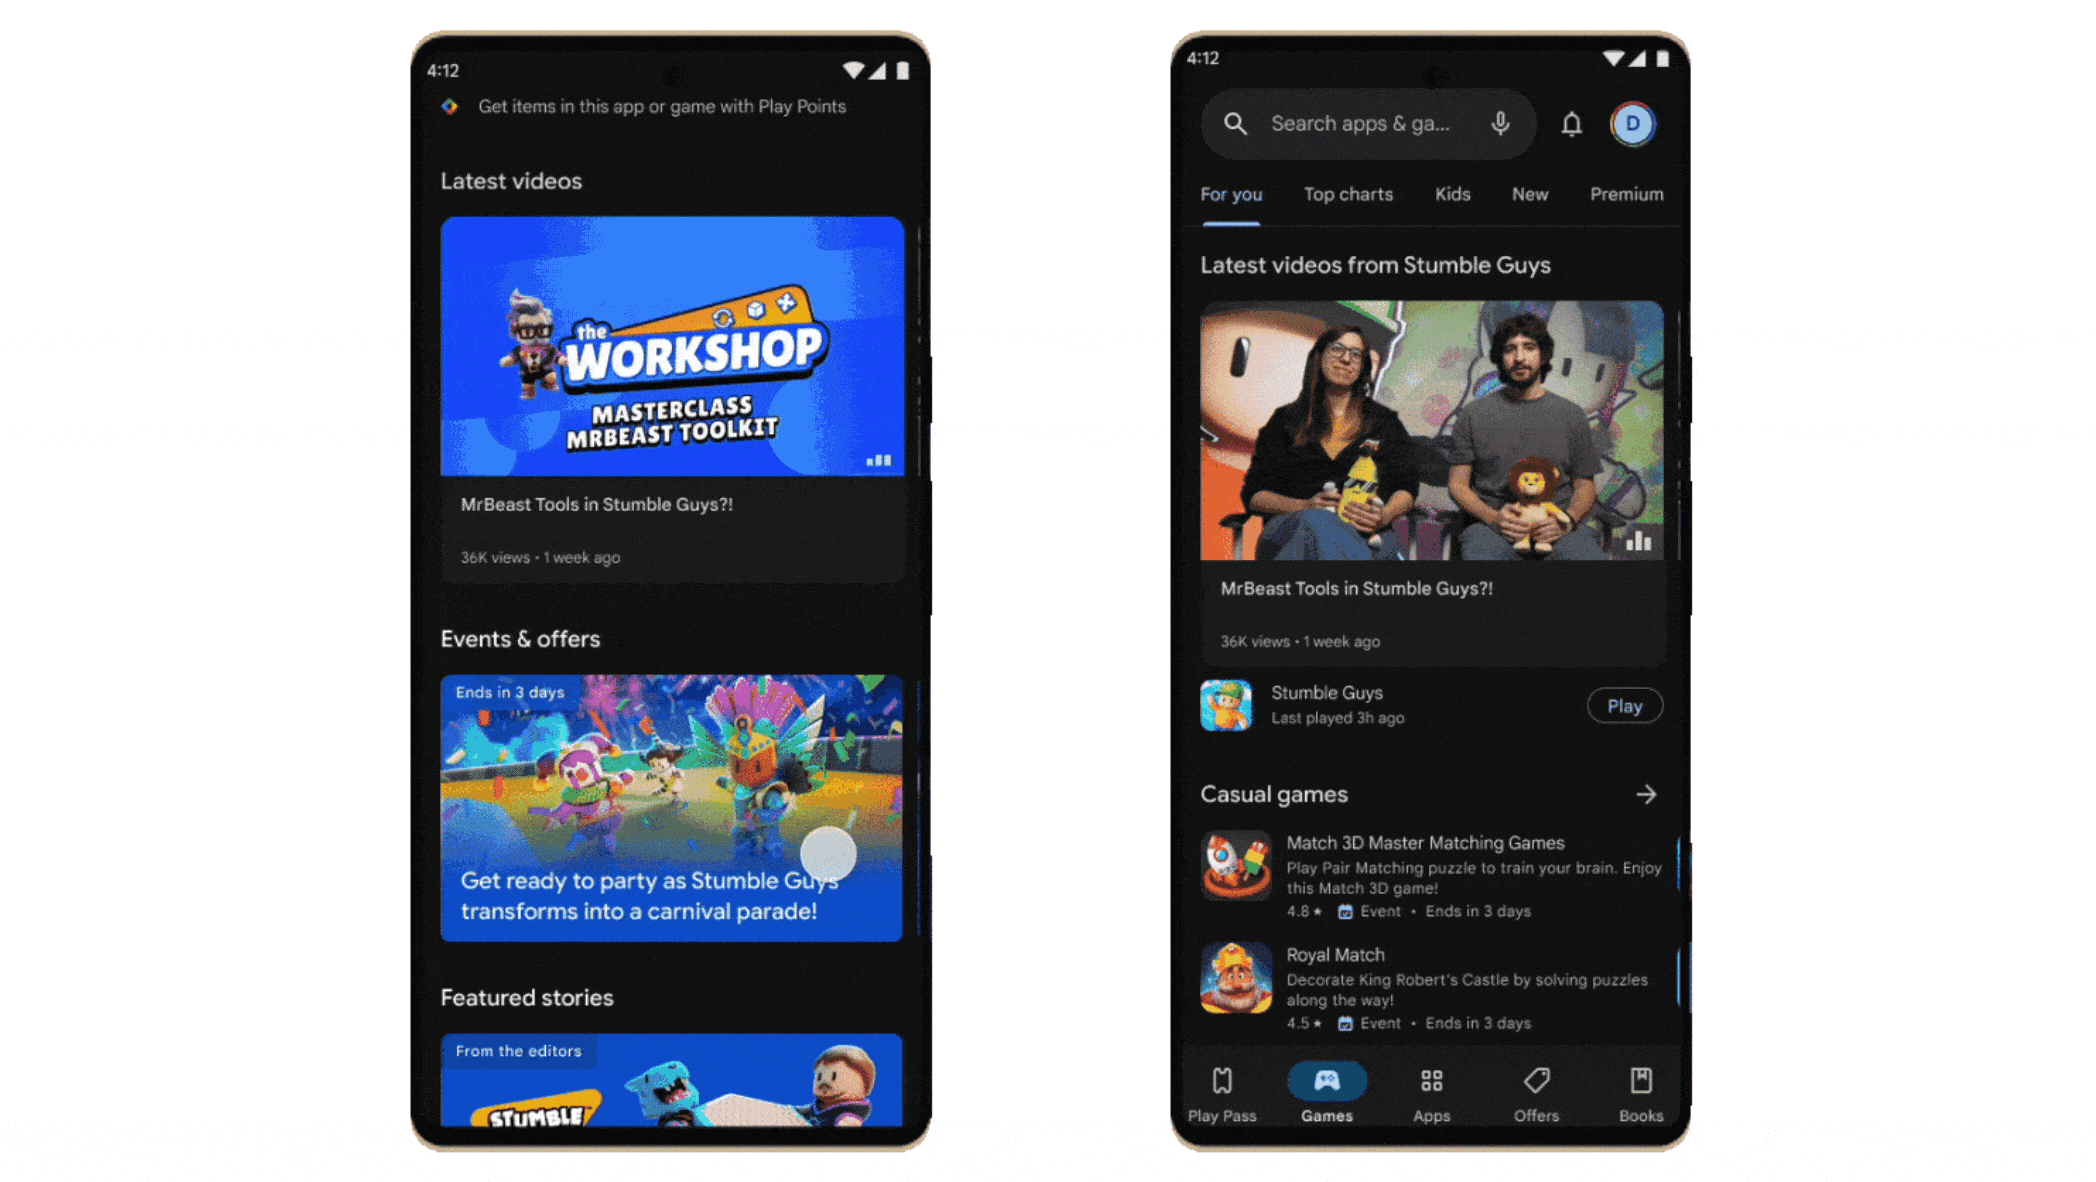 One mobile phone screen shows scrolls through a page showing "Latest videos," "Events & Offers" and FAQs while the second mobile phone screen shows a video playing in the Play Store with the Headline "Latest videos from Stumble Guys"